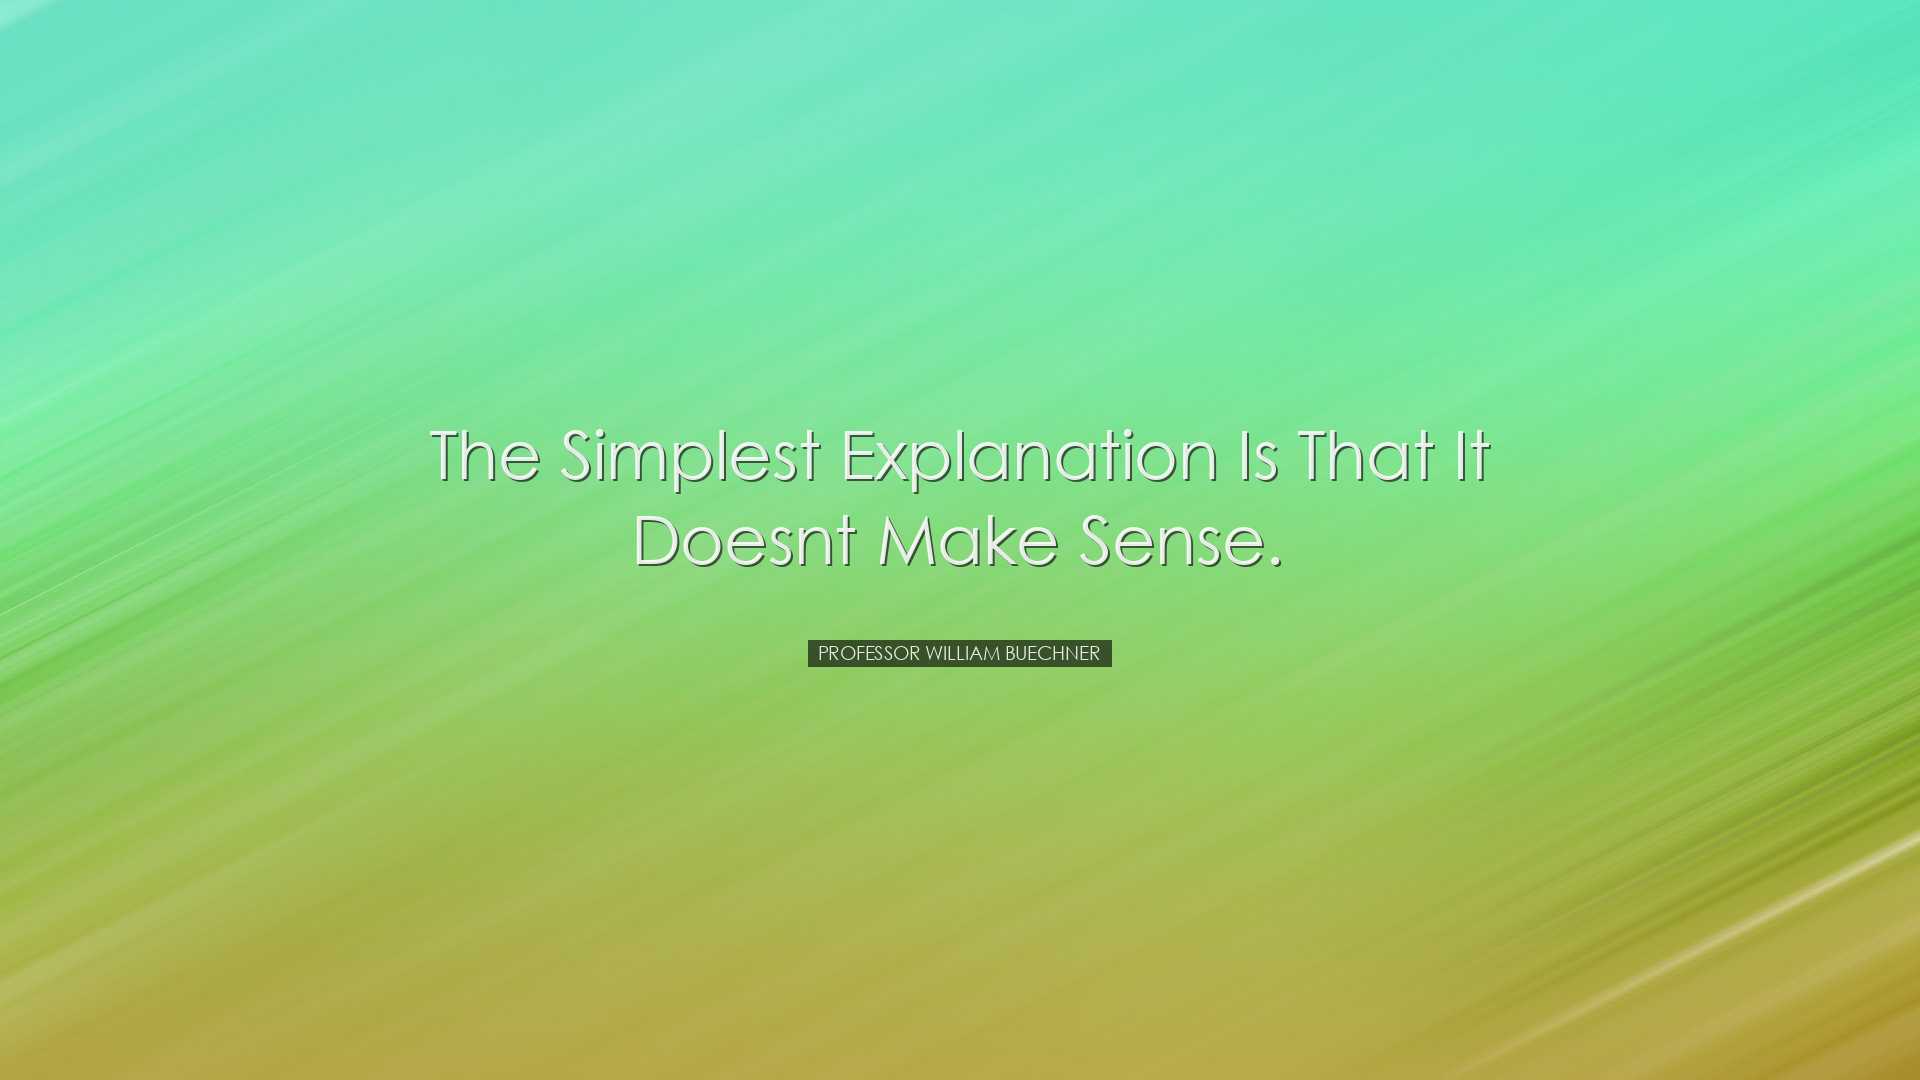 The simplest explanation is that it doesnt make sense. - Professor